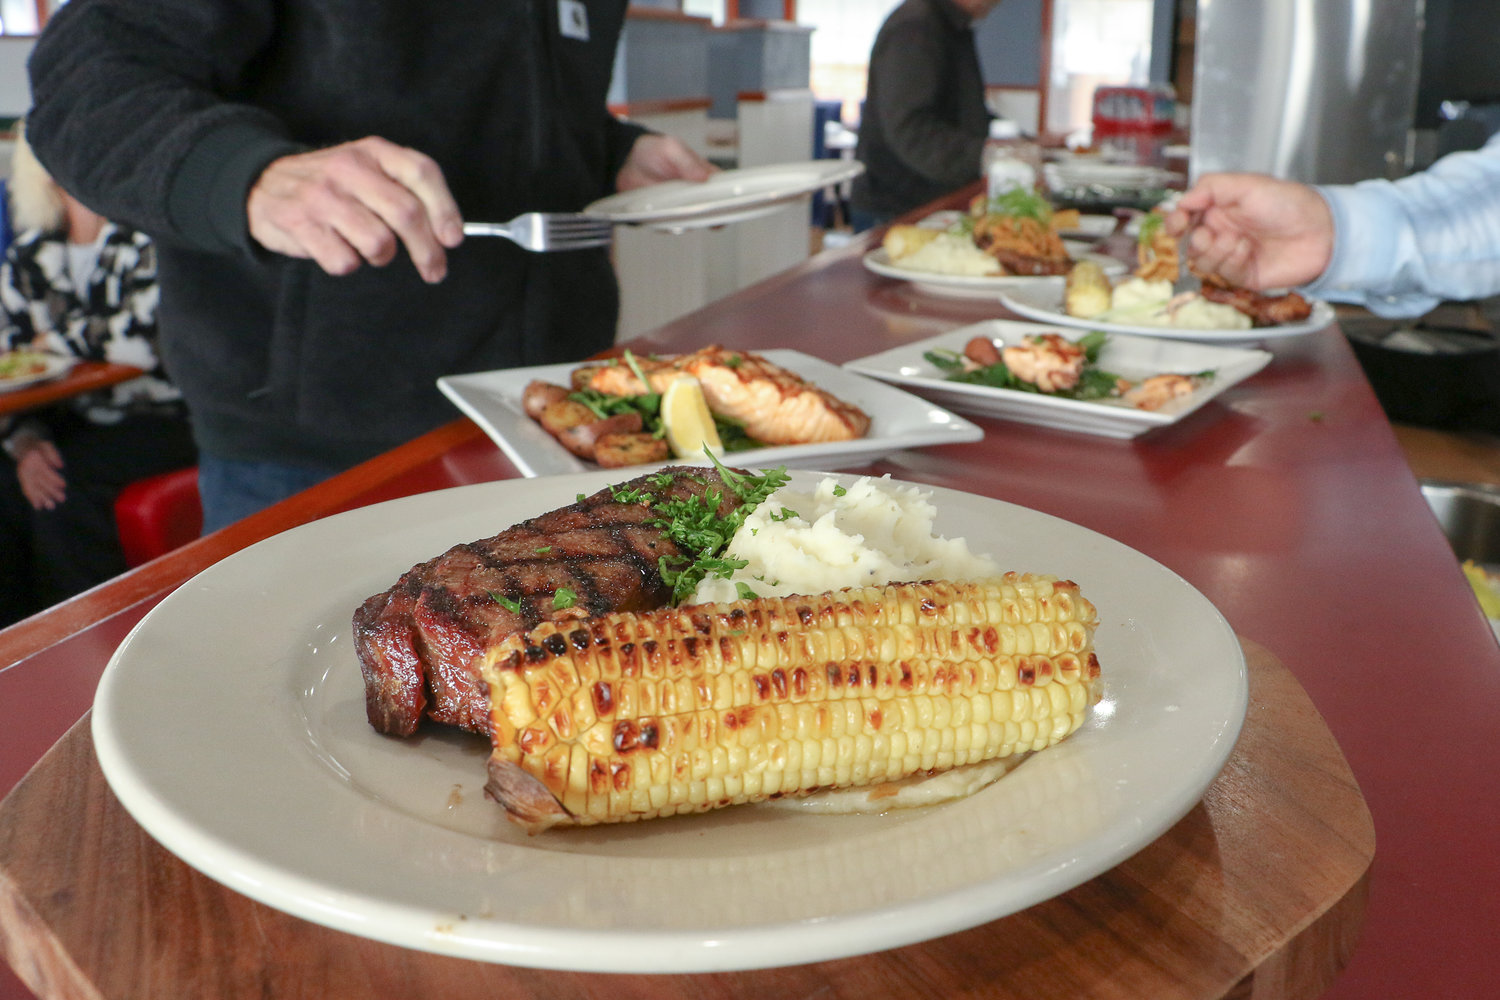 Prepared by Chef Eyner "Rene" Cardona, a dry-aged New York strip steak sits next to fluffy, house-made mashed potatoes and grilled corn-on-the-cob at Ocean Prime's menu sampling Monday morning.